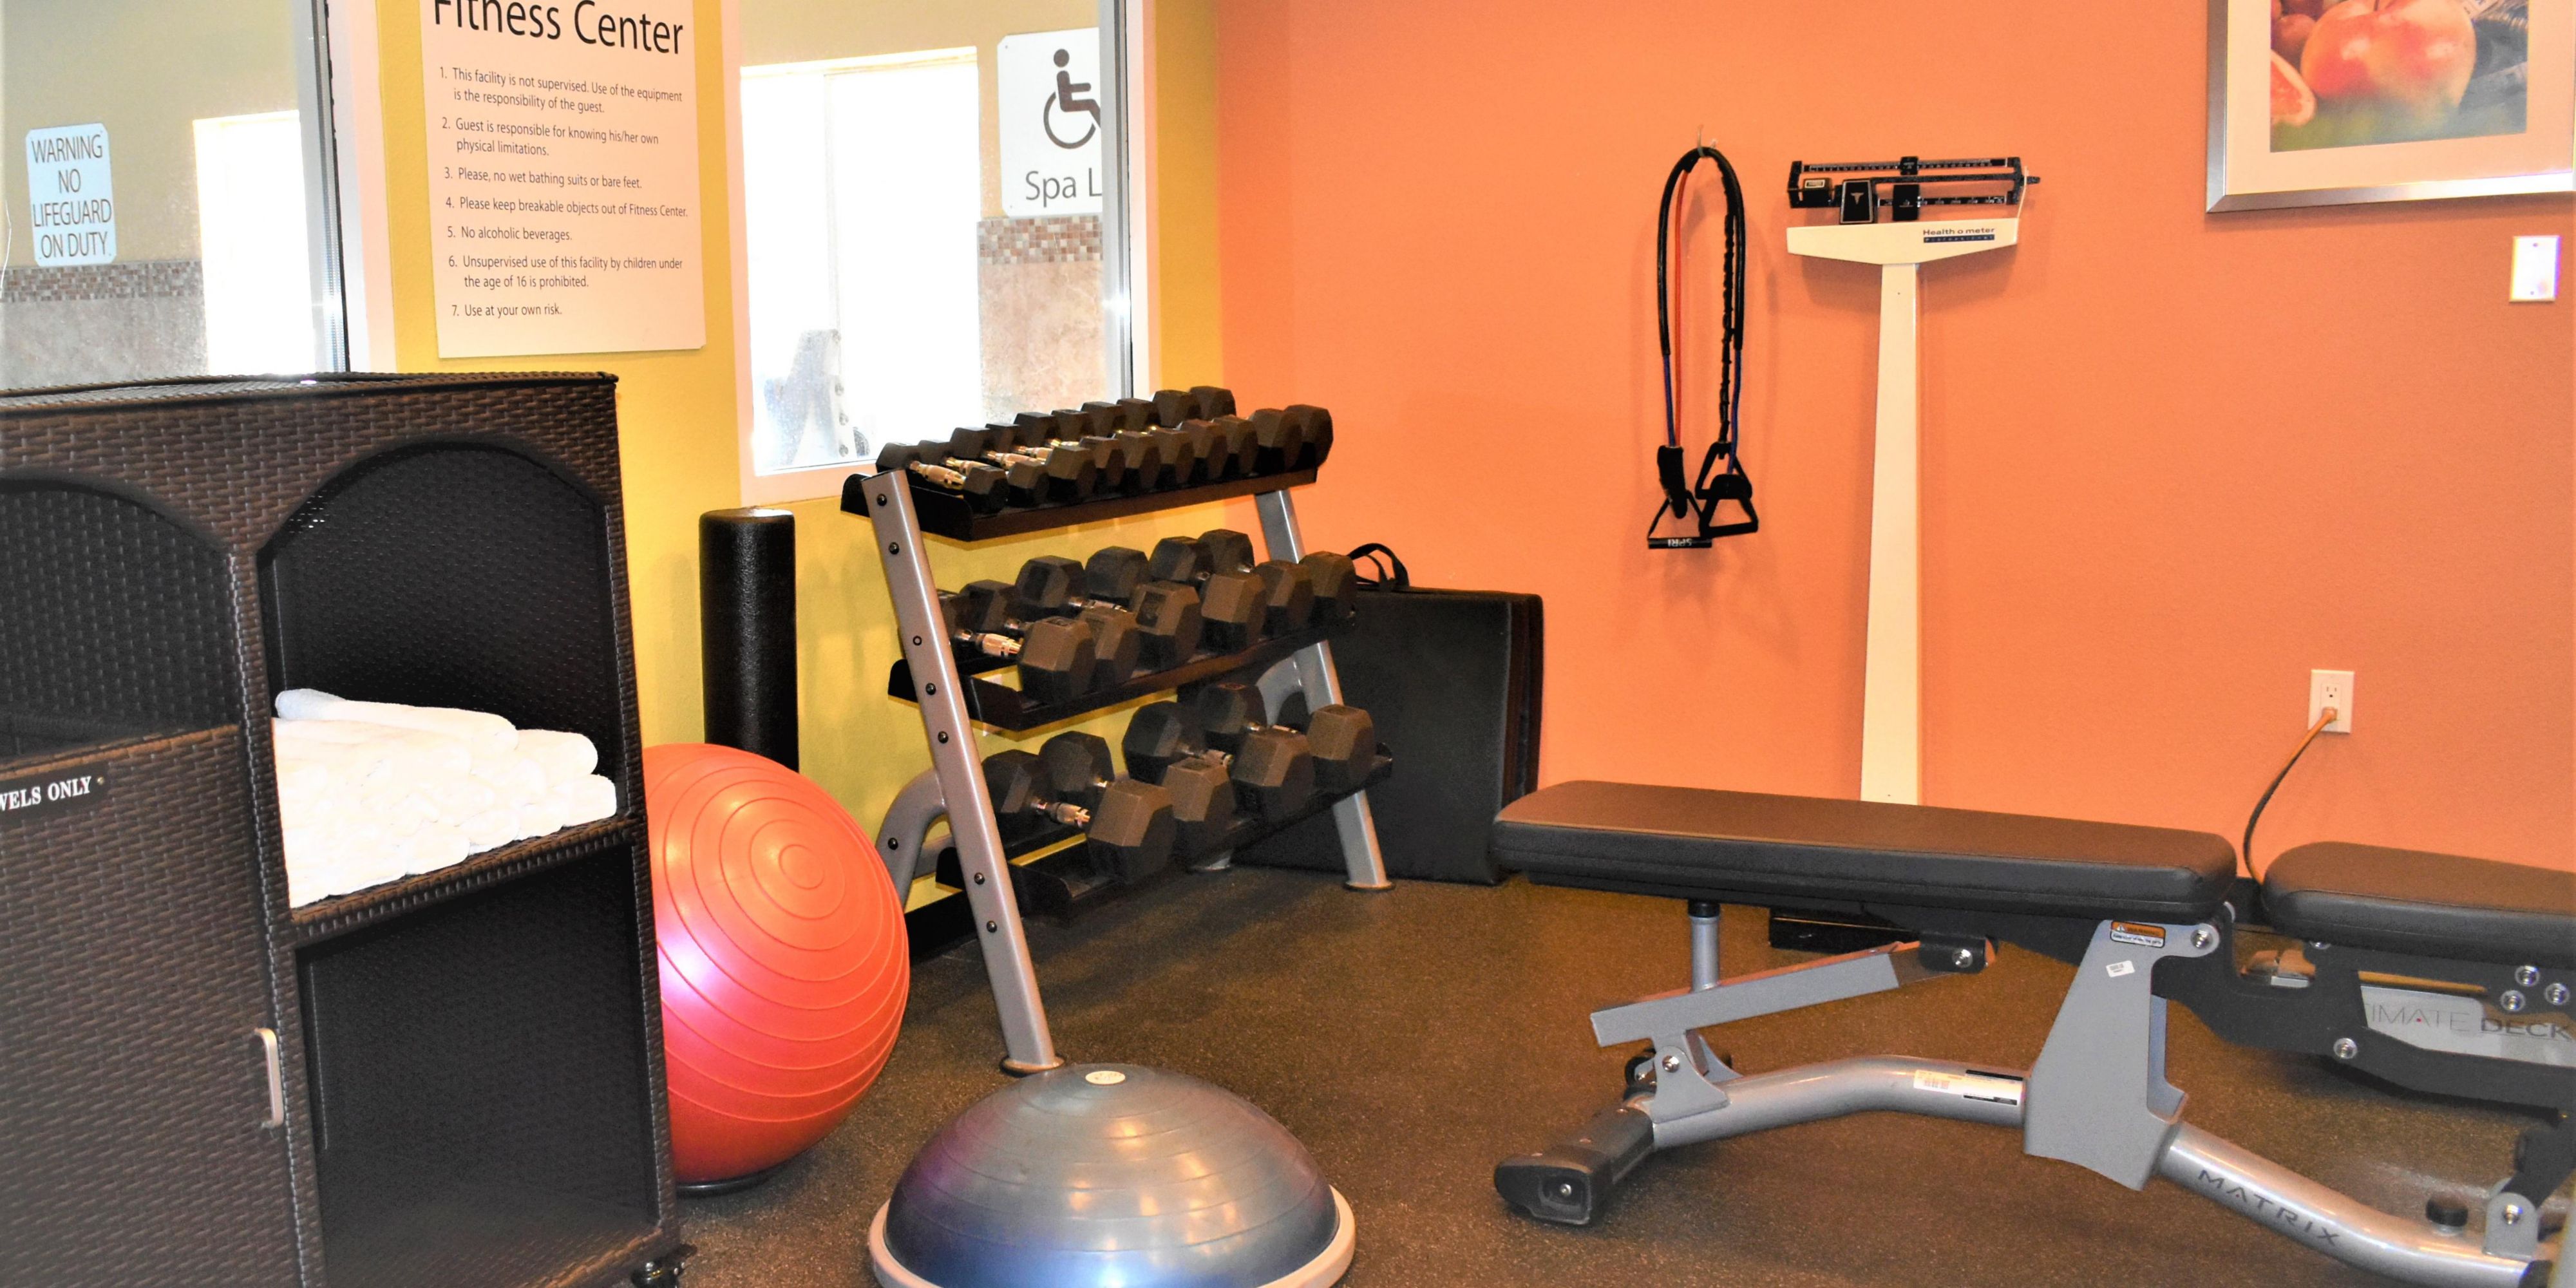 Stay active during your time at the Holiday Inn Express Bernalillo in our fitness center. We feature equipment such as free weights, stationary bike, treadmill, balance ball, elliptical to name a few. Our Fitness Center is open 24 hours 7 days a week for your convenience. Complimentary water & towels. Watch your favorite show while you work out!